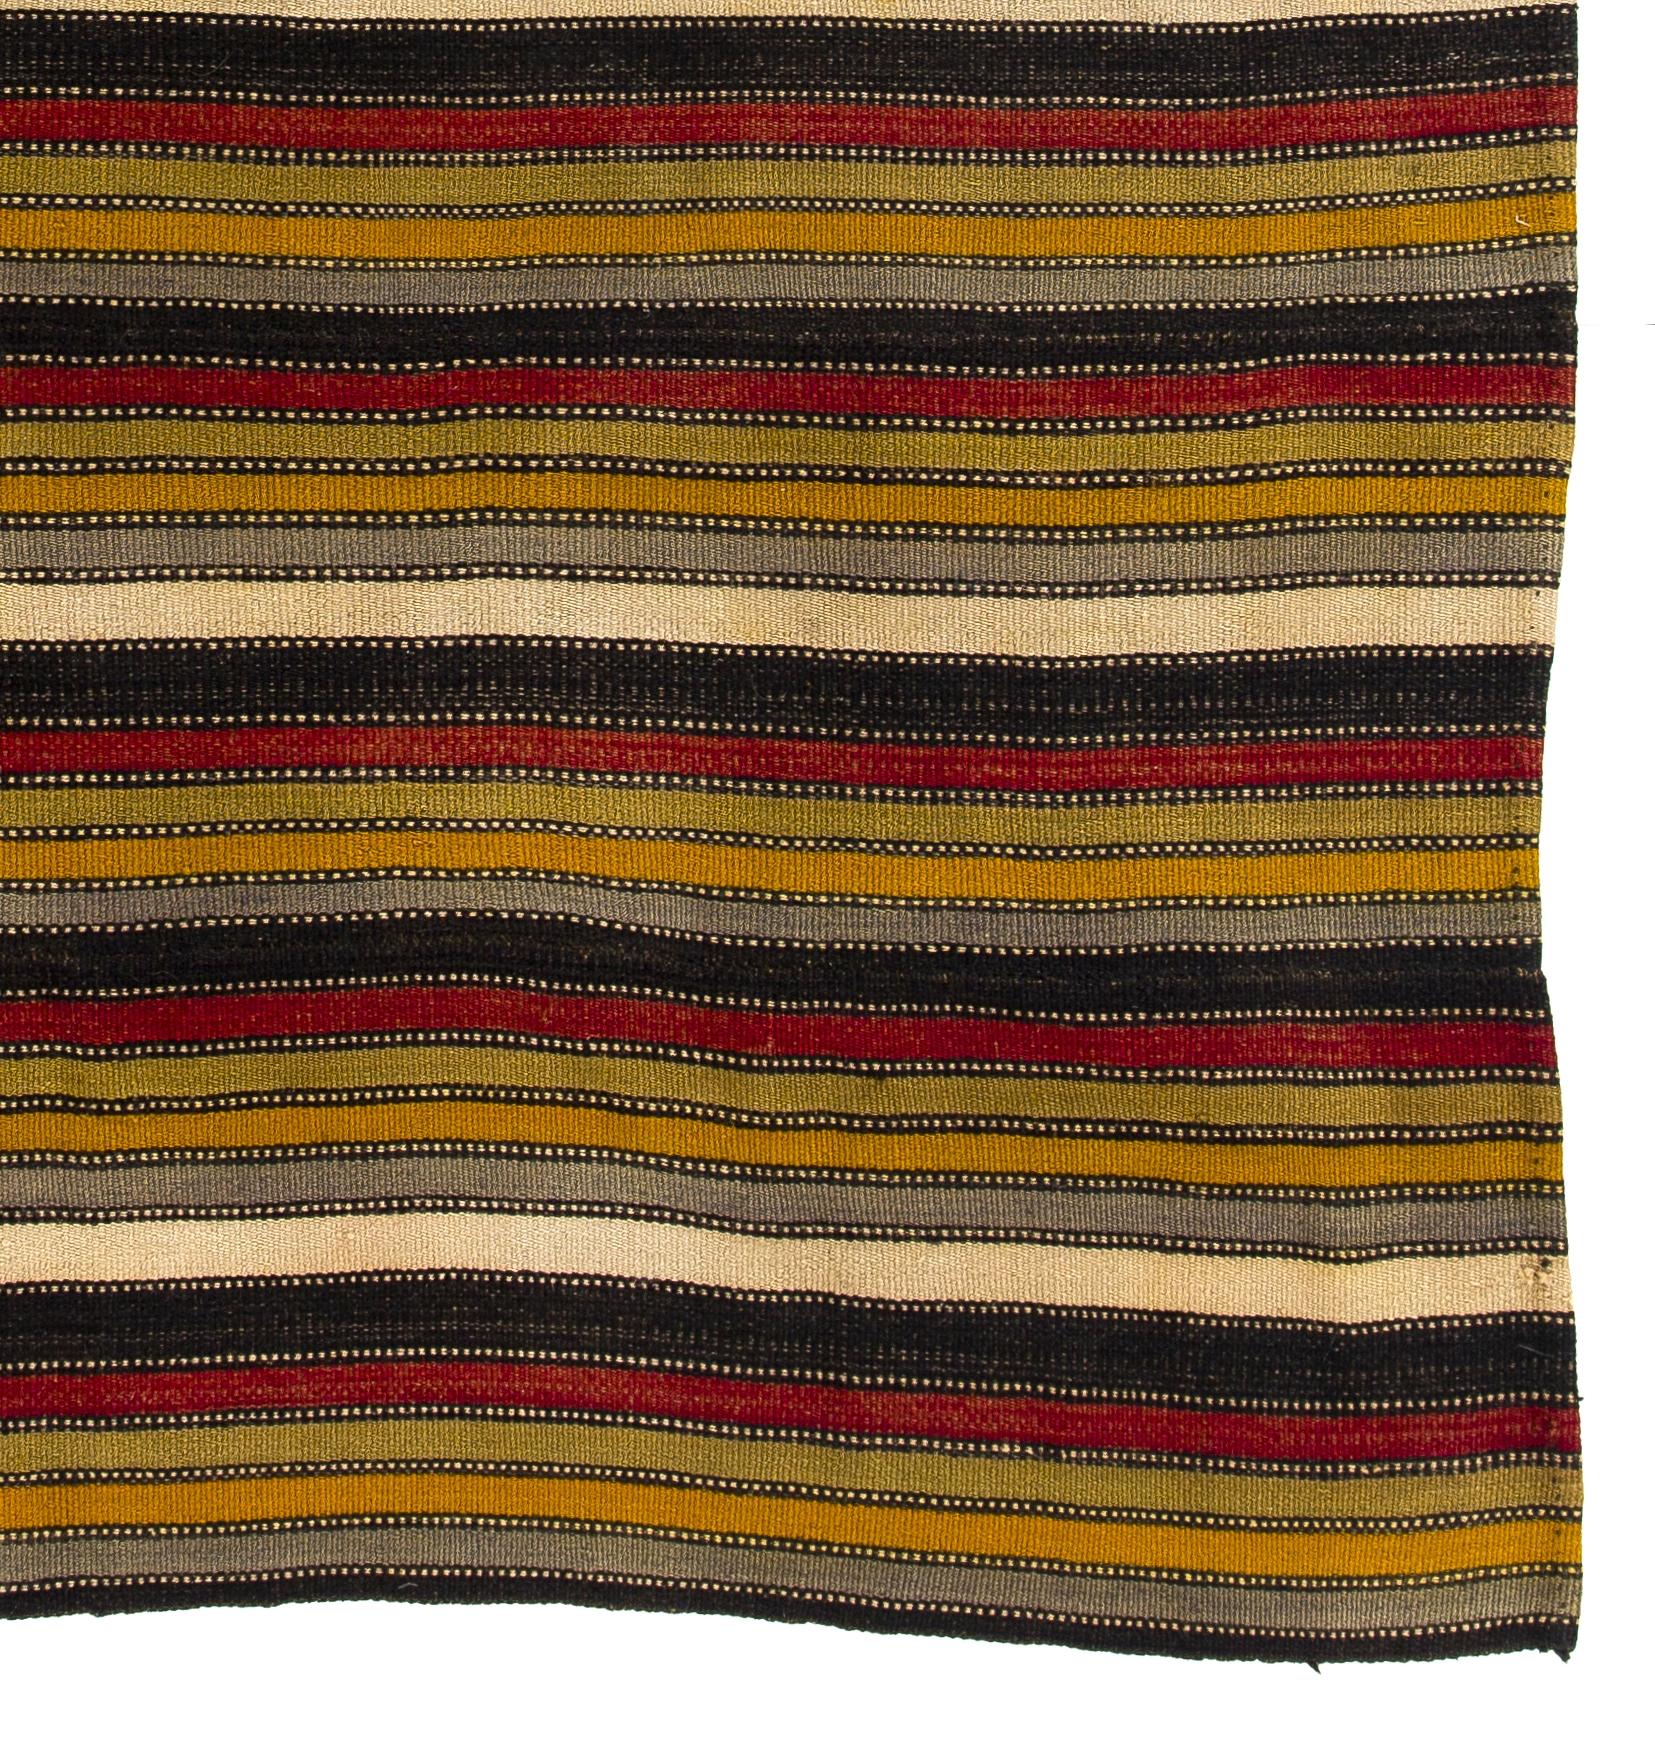 Hand-Woven 5.7x5.9 Ft Handwoven Striped Vintage Anatolian Kilim, Flat-weave Rug, 100% Wool For Sale